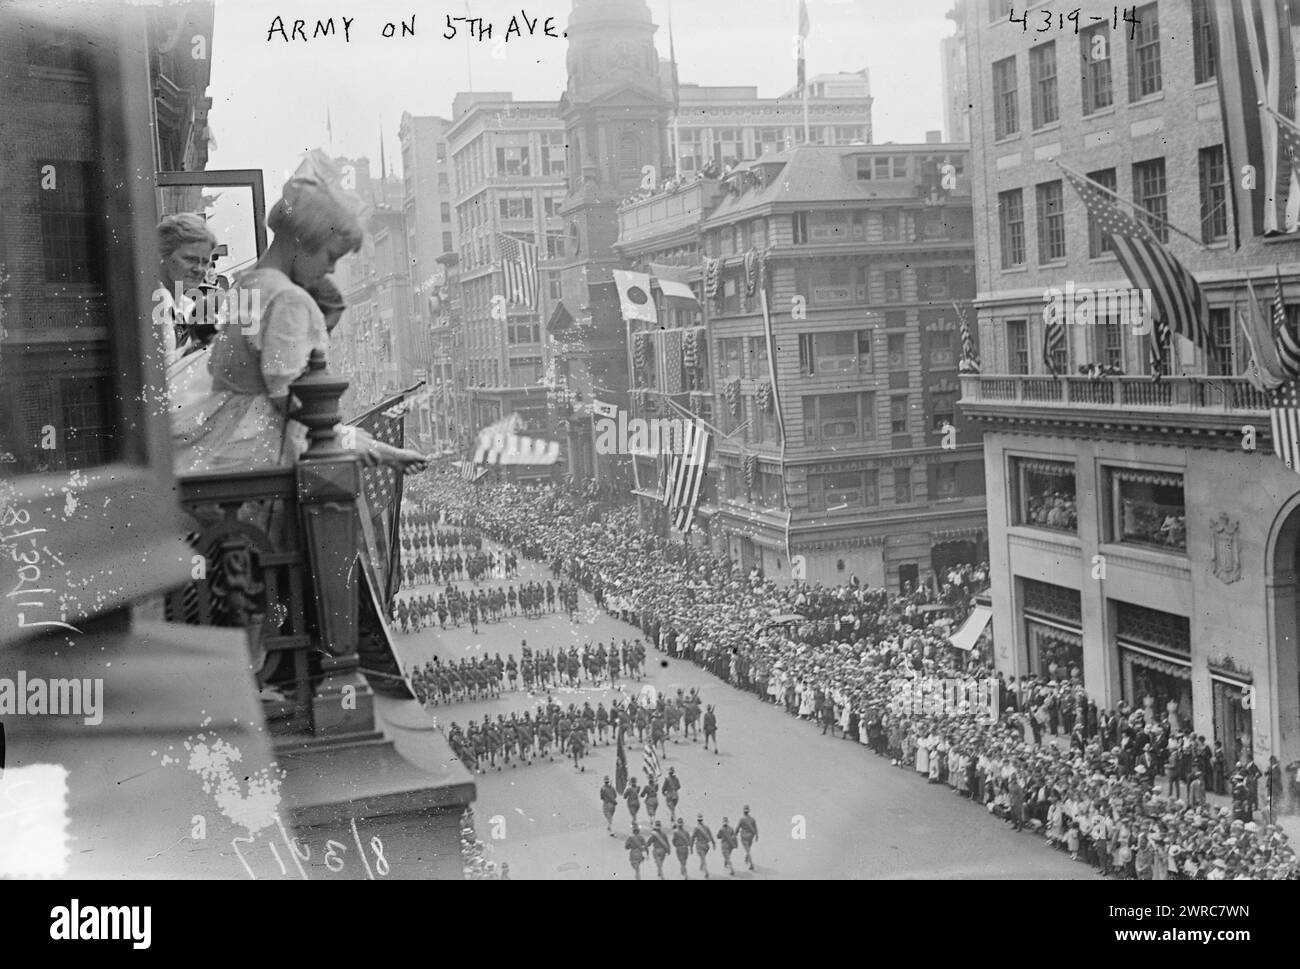 Army on 5th Ave., Photograph shows girls on a balcony and crowds on sidewalk watching a parade of the 27th Division (National Guard of New York) on August 30, 1917 in New York City. The view is looking south toward the intersection of East 38th Street. On the far side of 38th is the Franklin Simon store, and on the near side is Lord & Taylor at 424-34 5th Avenue., 1917 Aug. 30, World War, 1914-1918, Glass negatives, 1 negative: glass Stock Photo